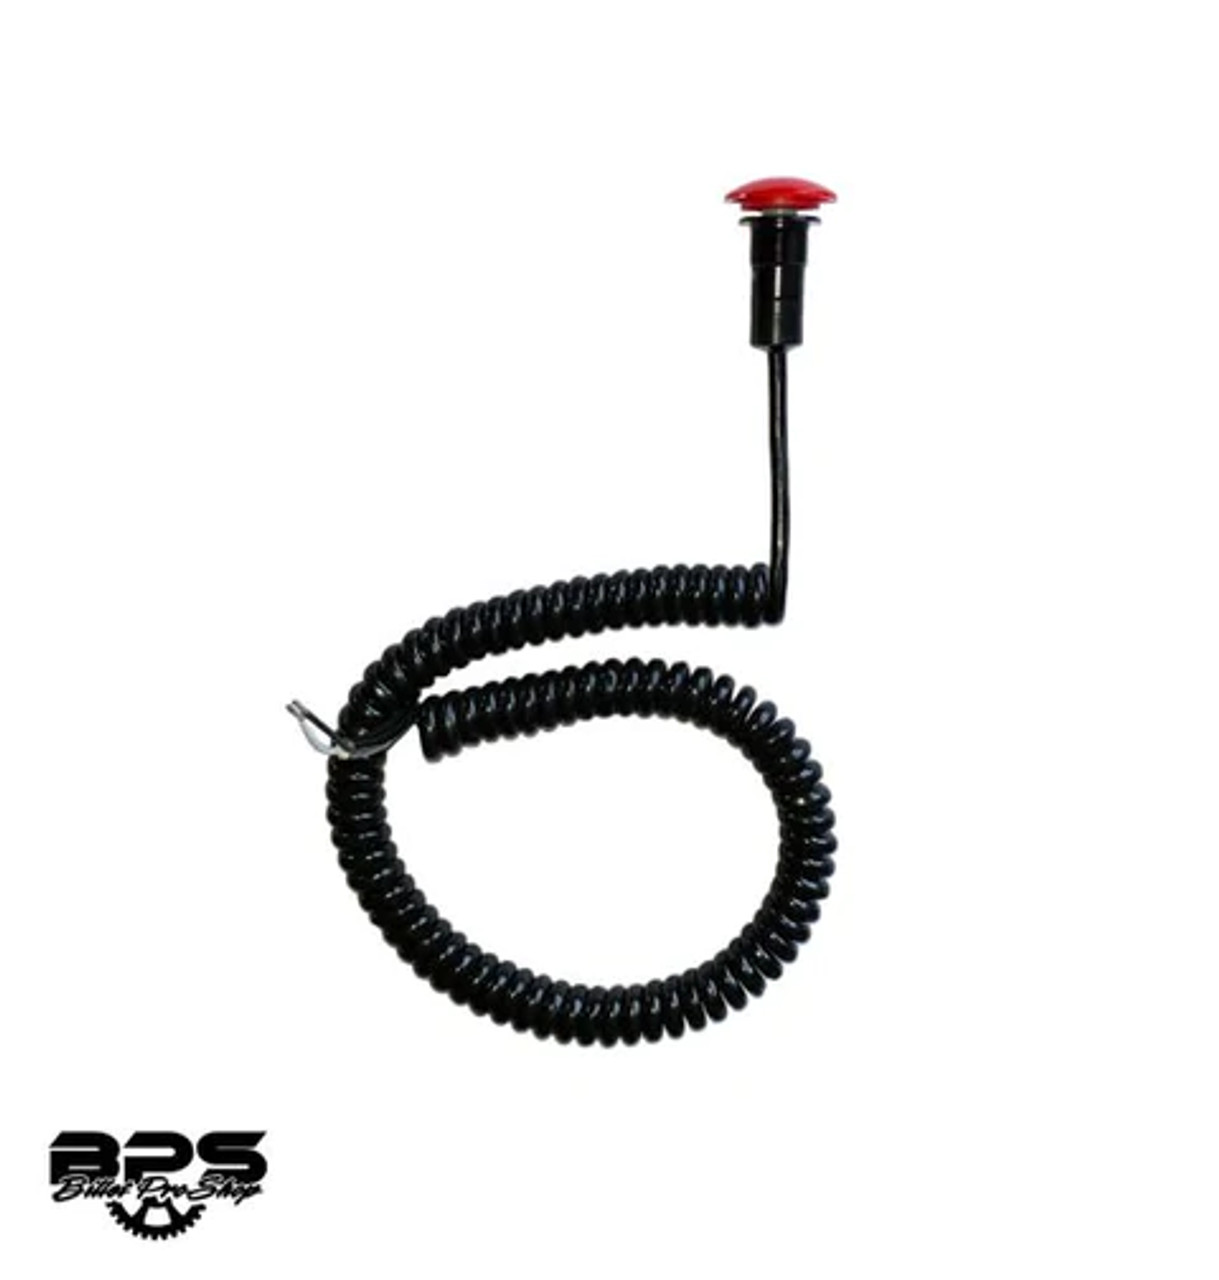 BPS Momentary Push Button W/ Spiral Cord (Large Mushroom)